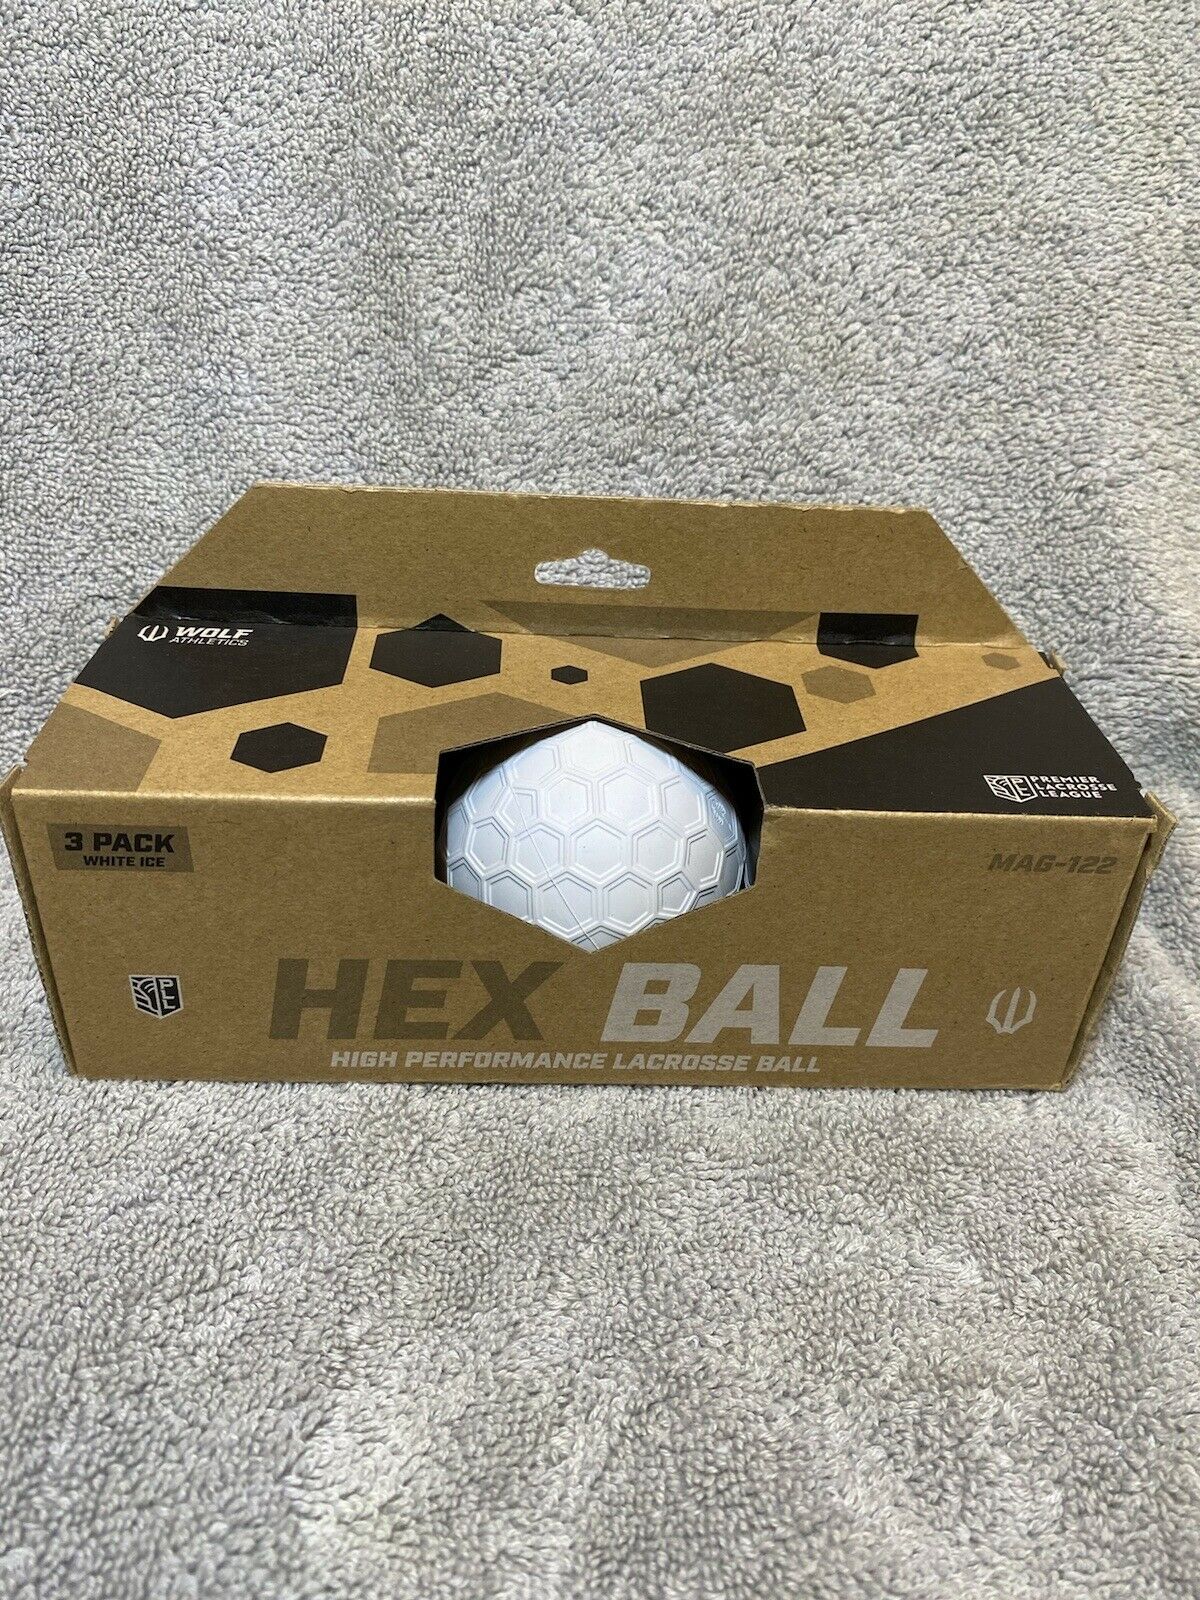 Wolf Athletics Lacrosse Hex Ball White 3-pack Pll Approved